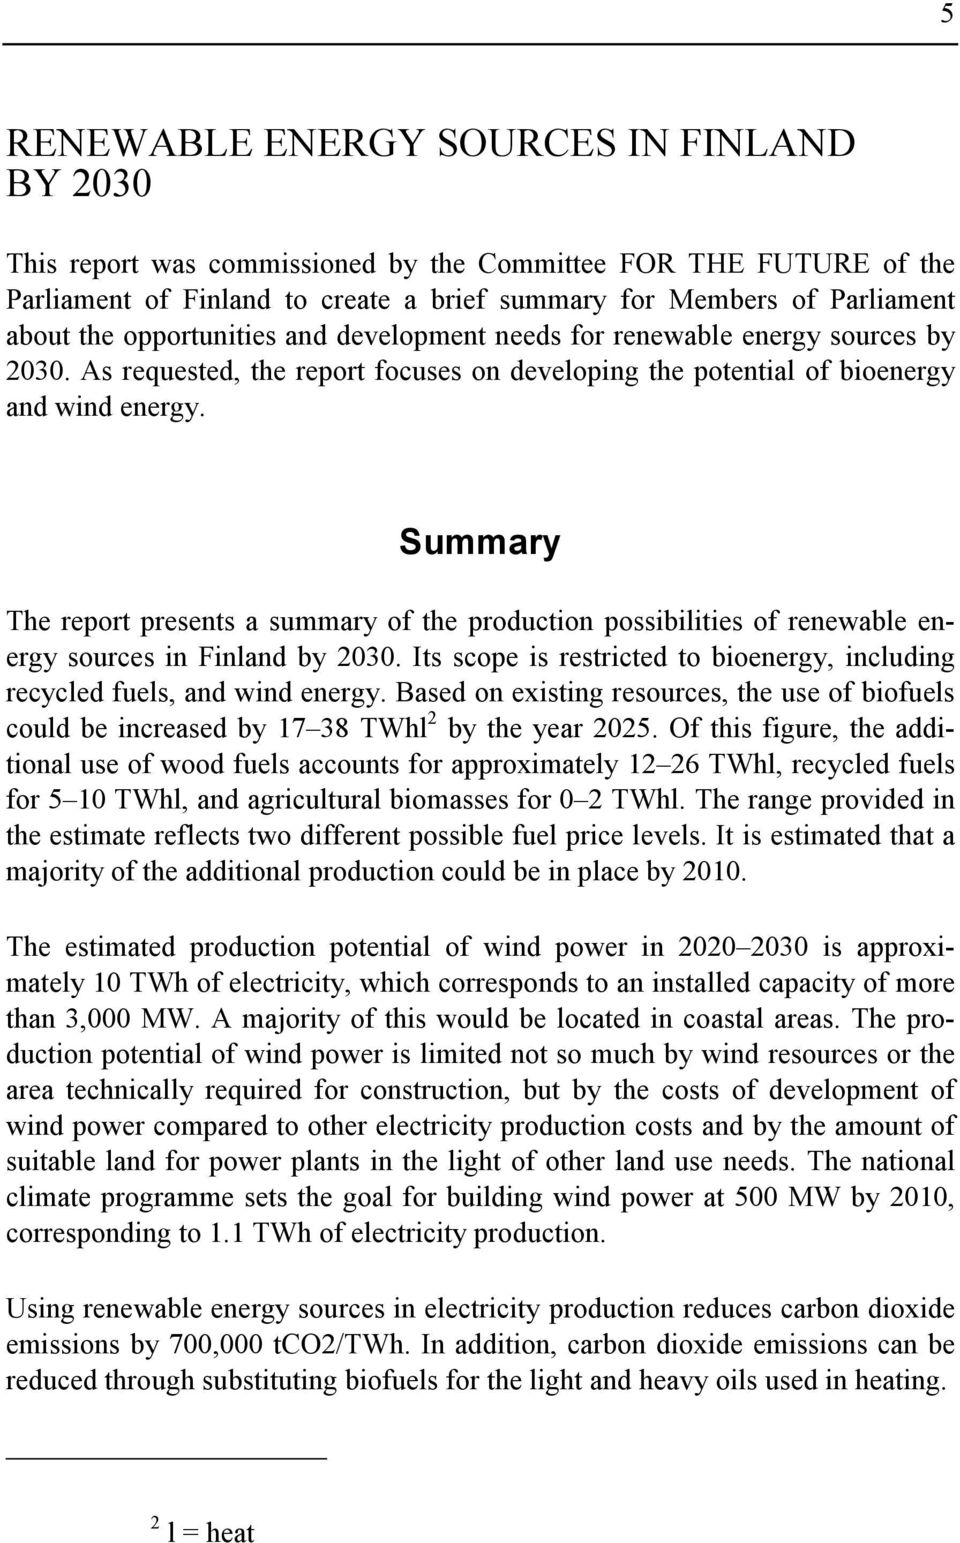 Summary The report presents a summary of the production possibilities of renewable energy sources in Finland by 2030. Its scope is restricted to bioenergy, including recycled fuels, and wind energy.